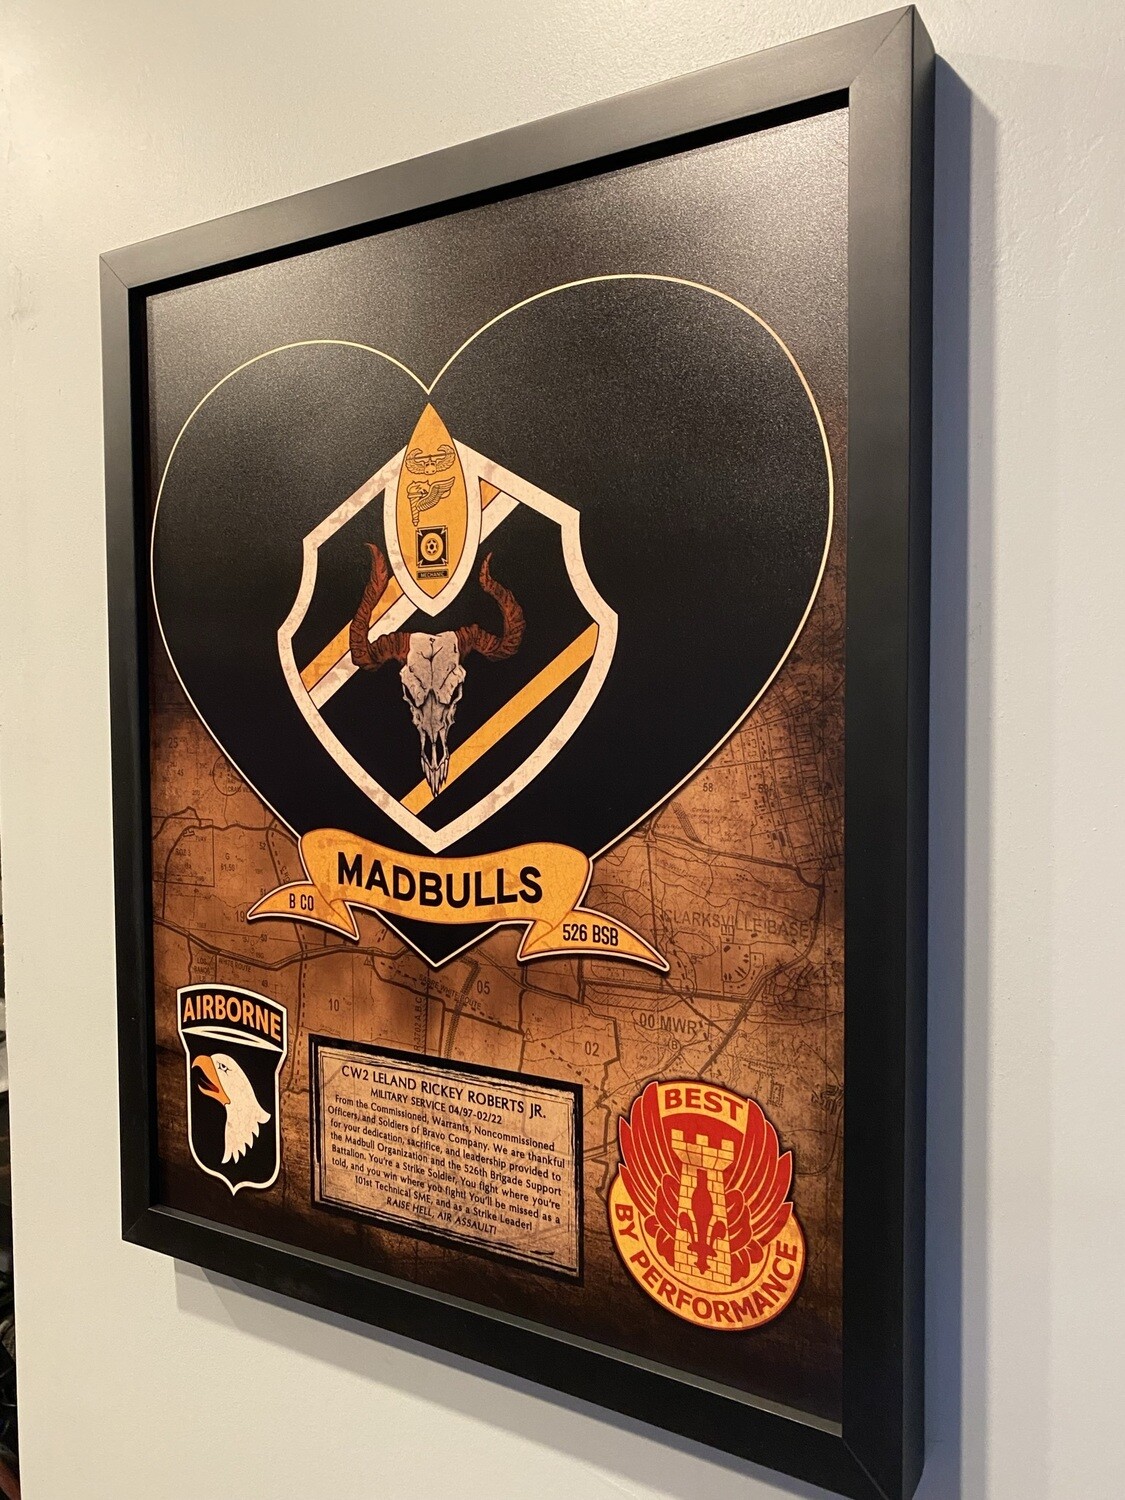 B Co "Madbulls" 526 BSB Stained/Painted wood Plaque - 20.5"x16.5"